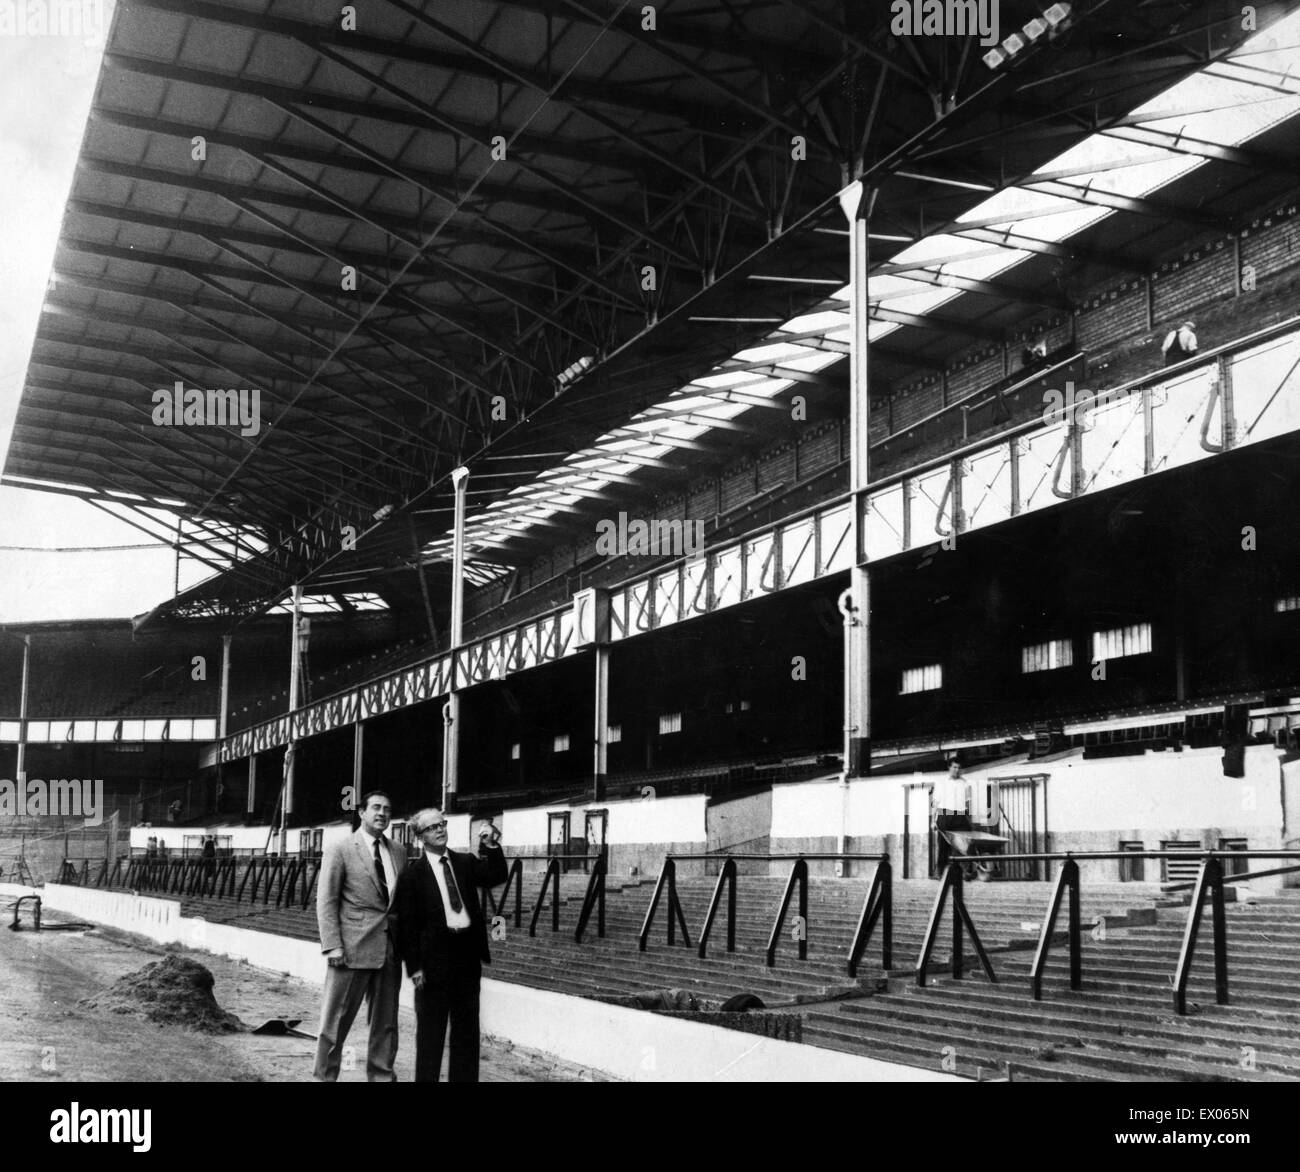 Goodison Park, home to Everton FC, the football stadium is located in Walton, Liverpool, England. 23rd July 1963. Pictured, Everton's hugh new umbrella roof, a cantilever one, on the Bullens Road stand is now complete. John Moores, the clubs chairman (rig Stock Photo